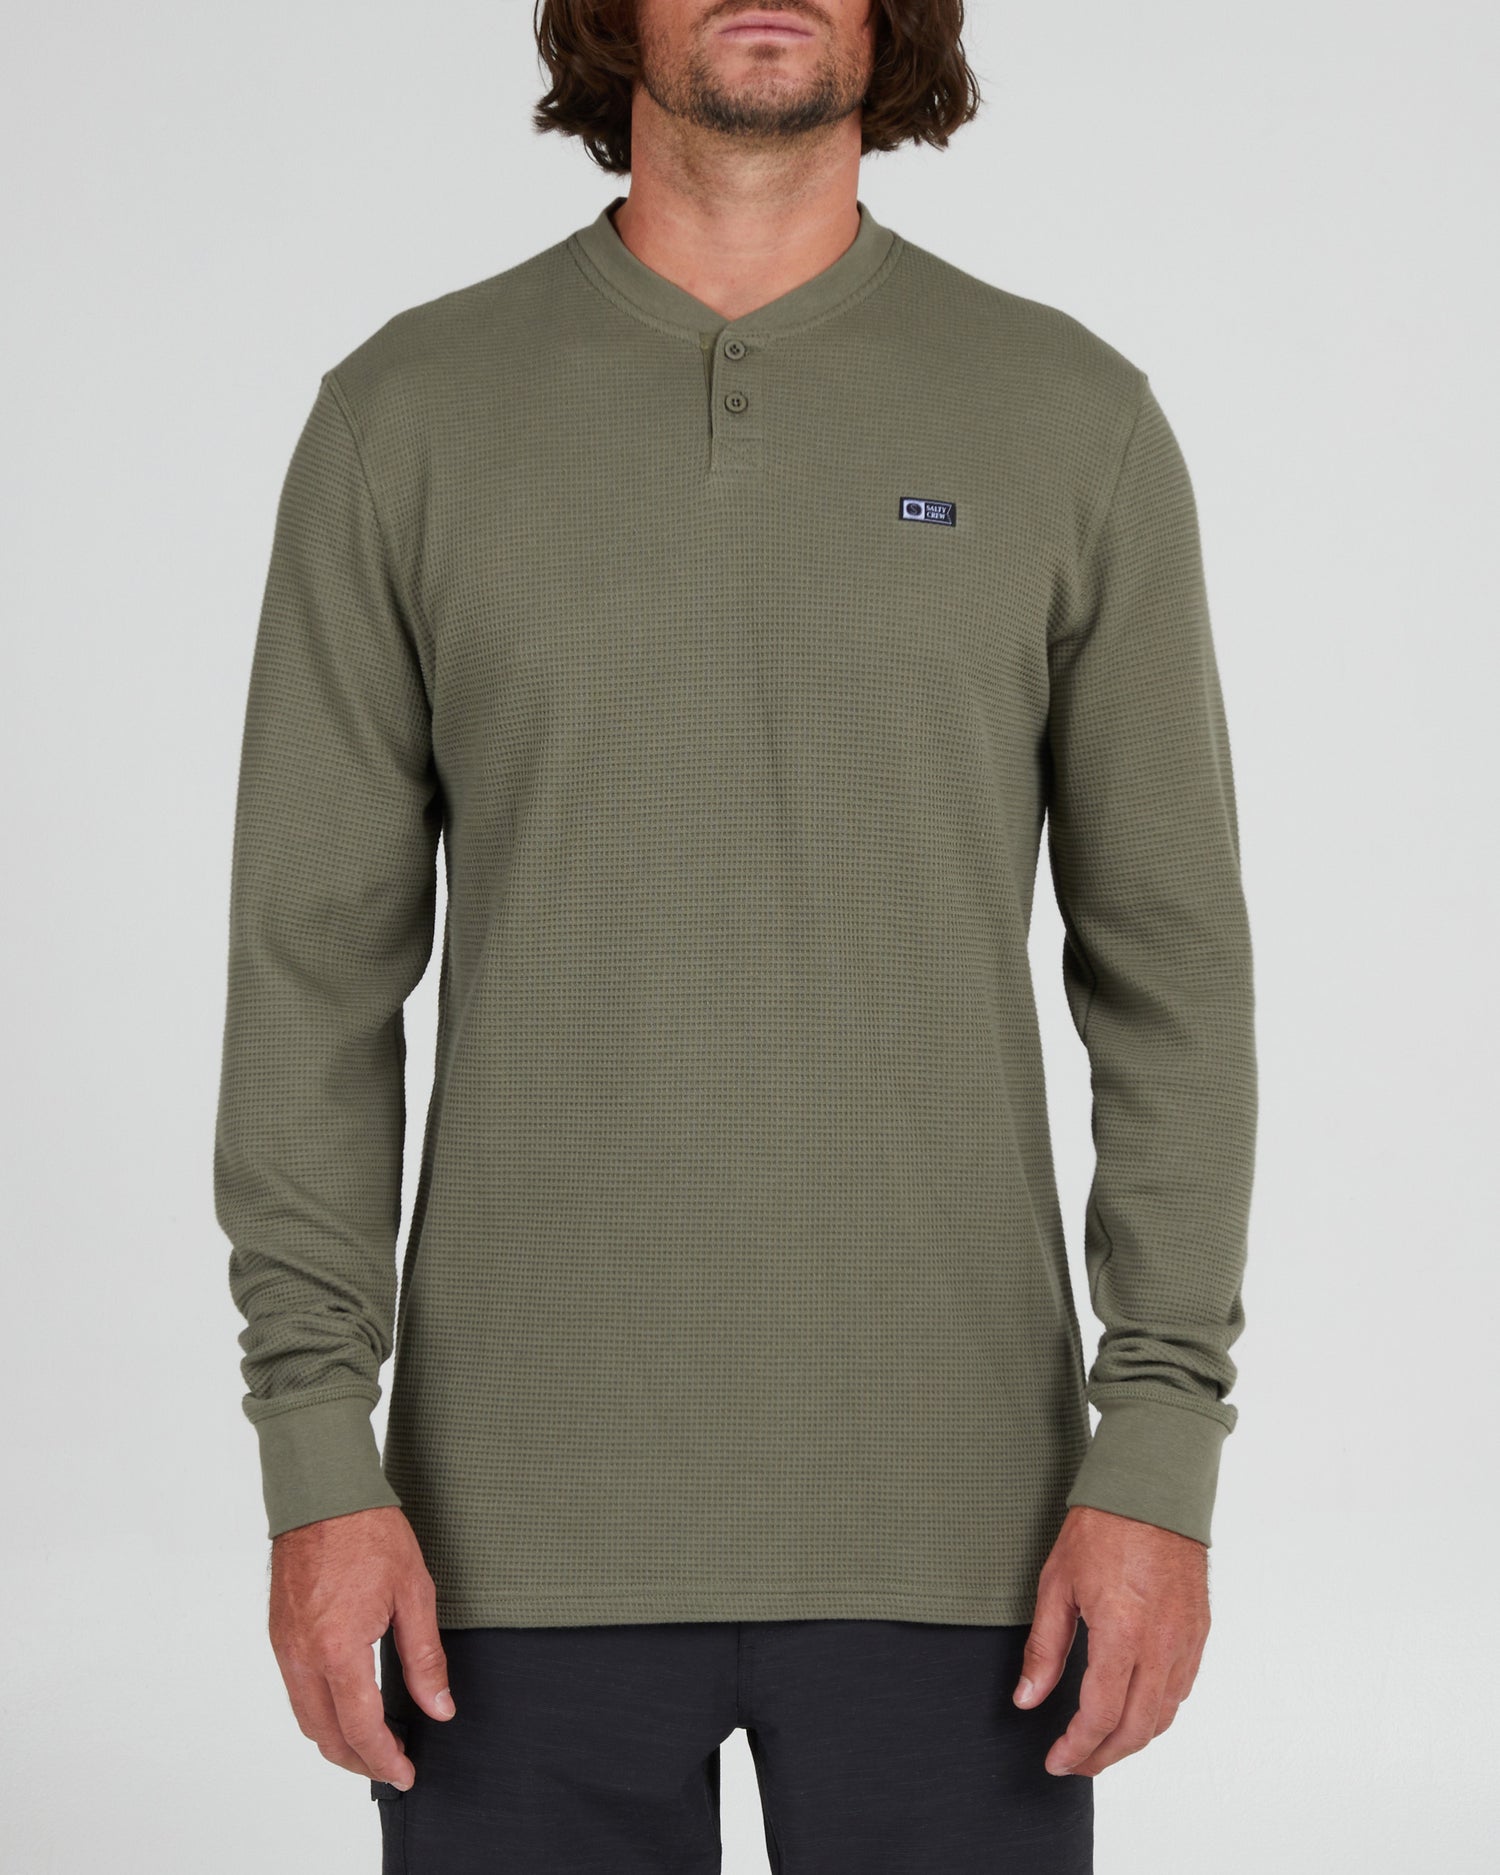 front view of Daybreak 2 Olive L/S Thermal